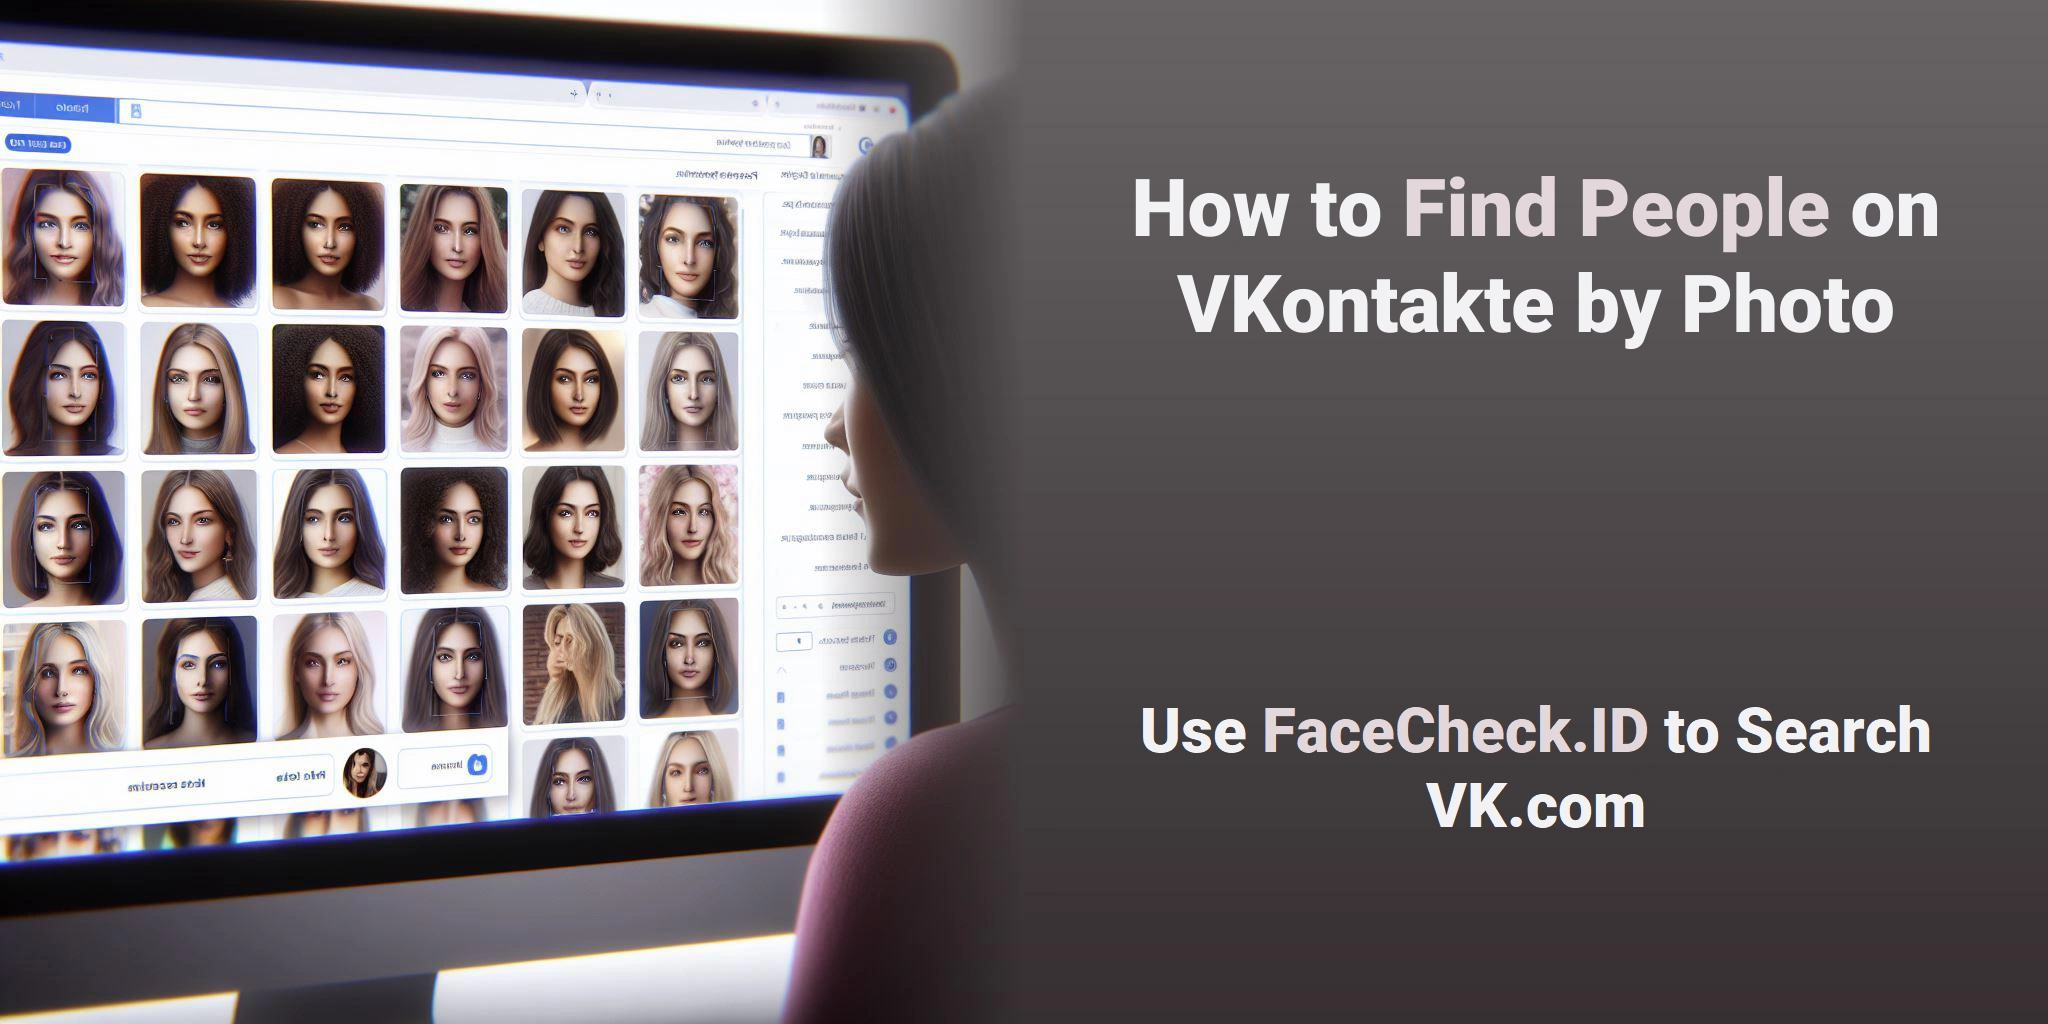 How to Find People on VK.com by Photo